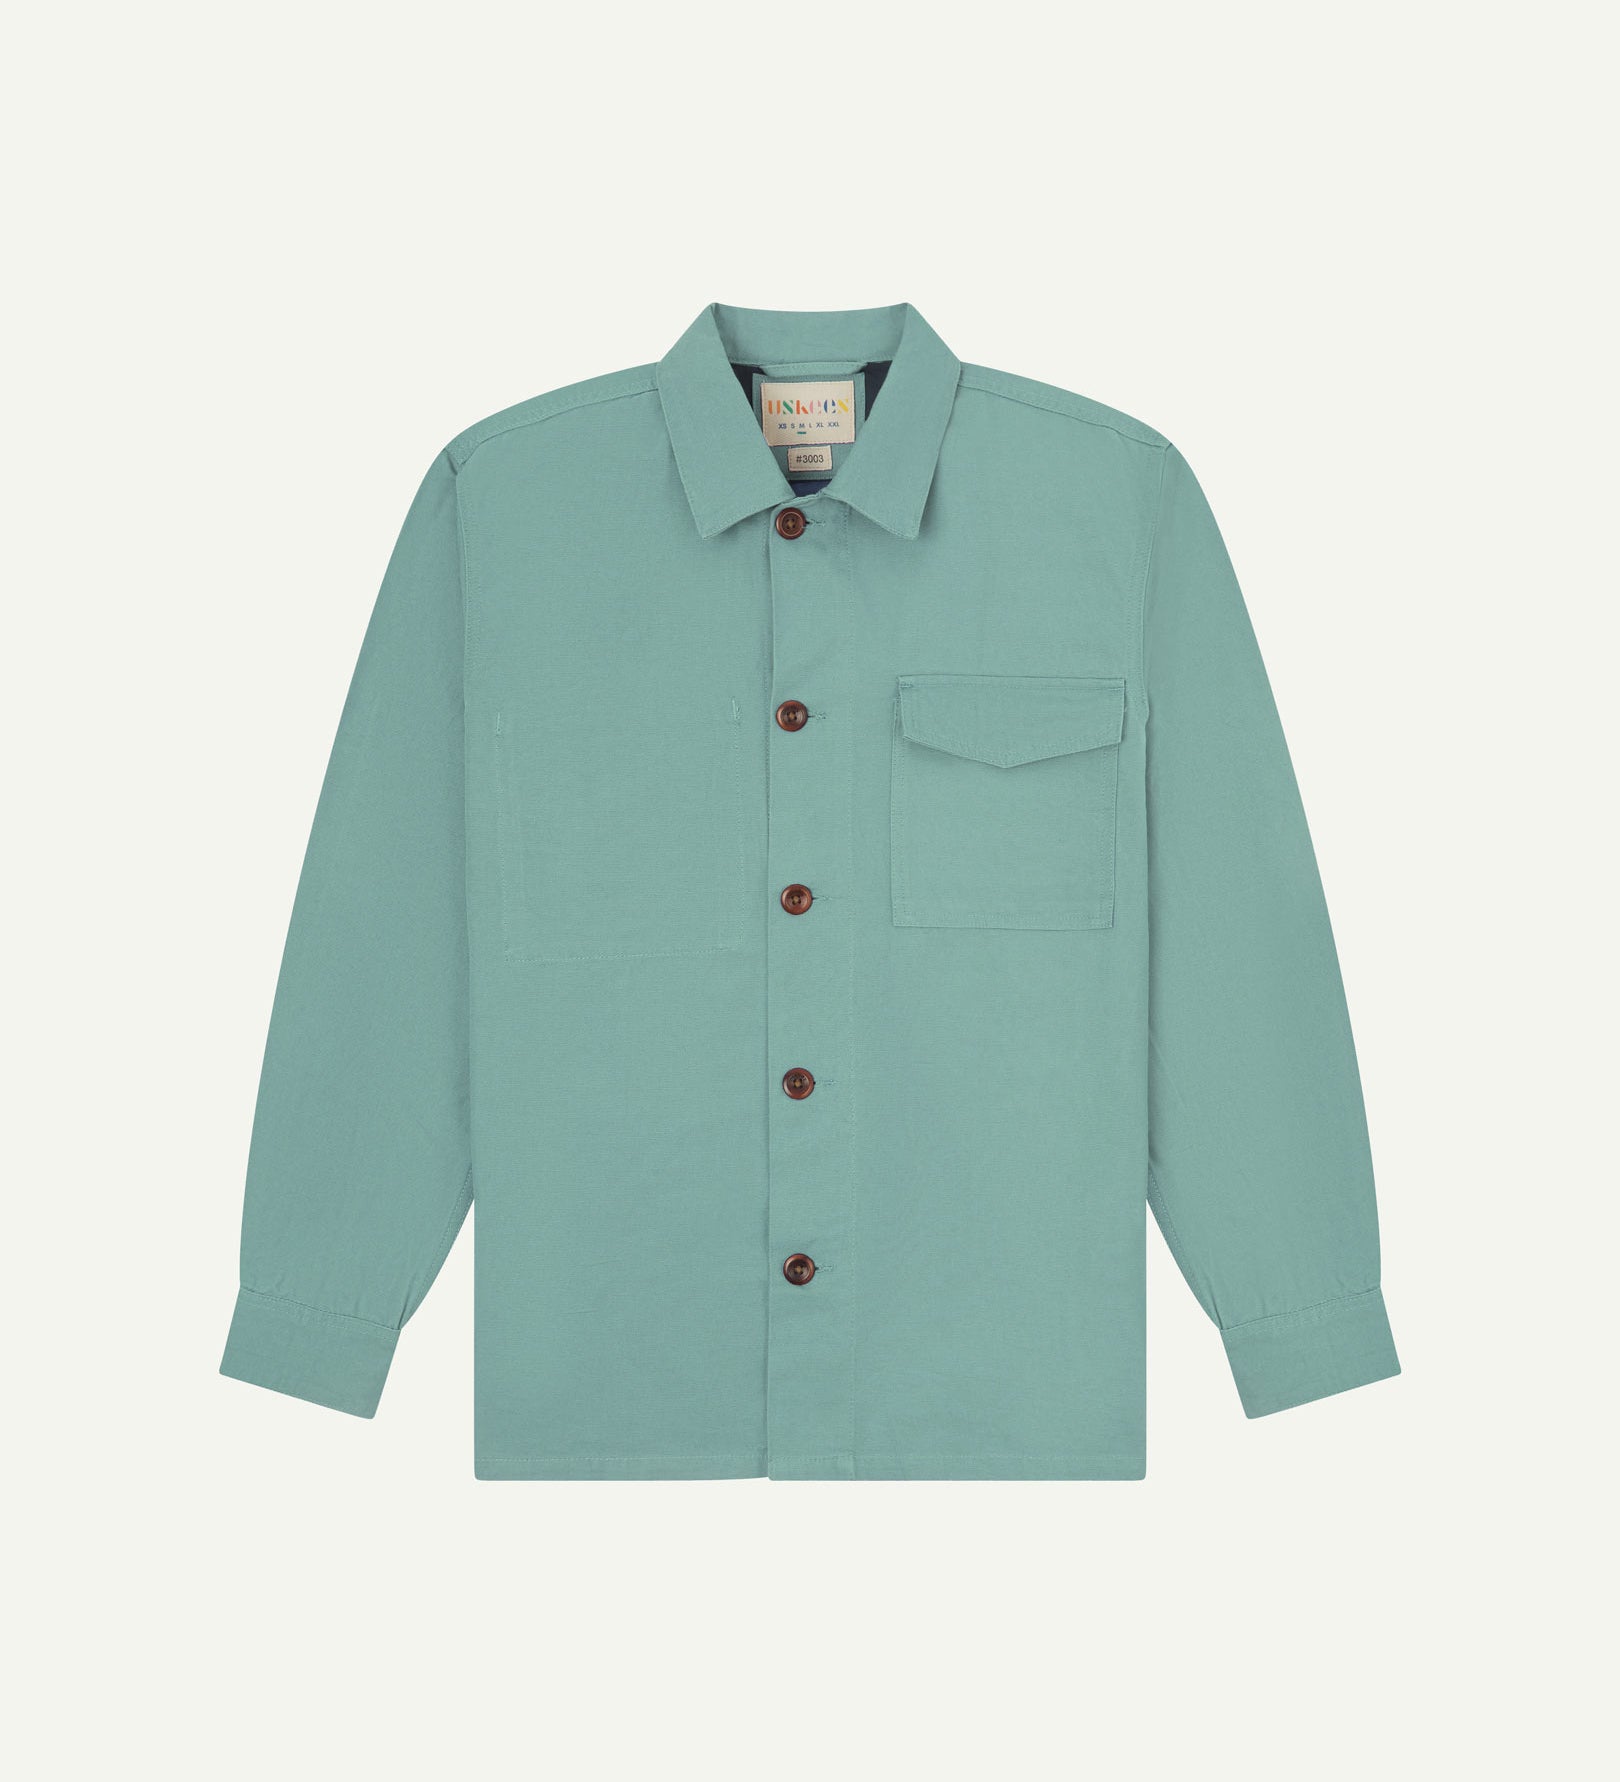 Eucalyptus (mint-green) buttoned organic cotton workshirt from Uskees with clear view of chest pocket and Uskees branding label.